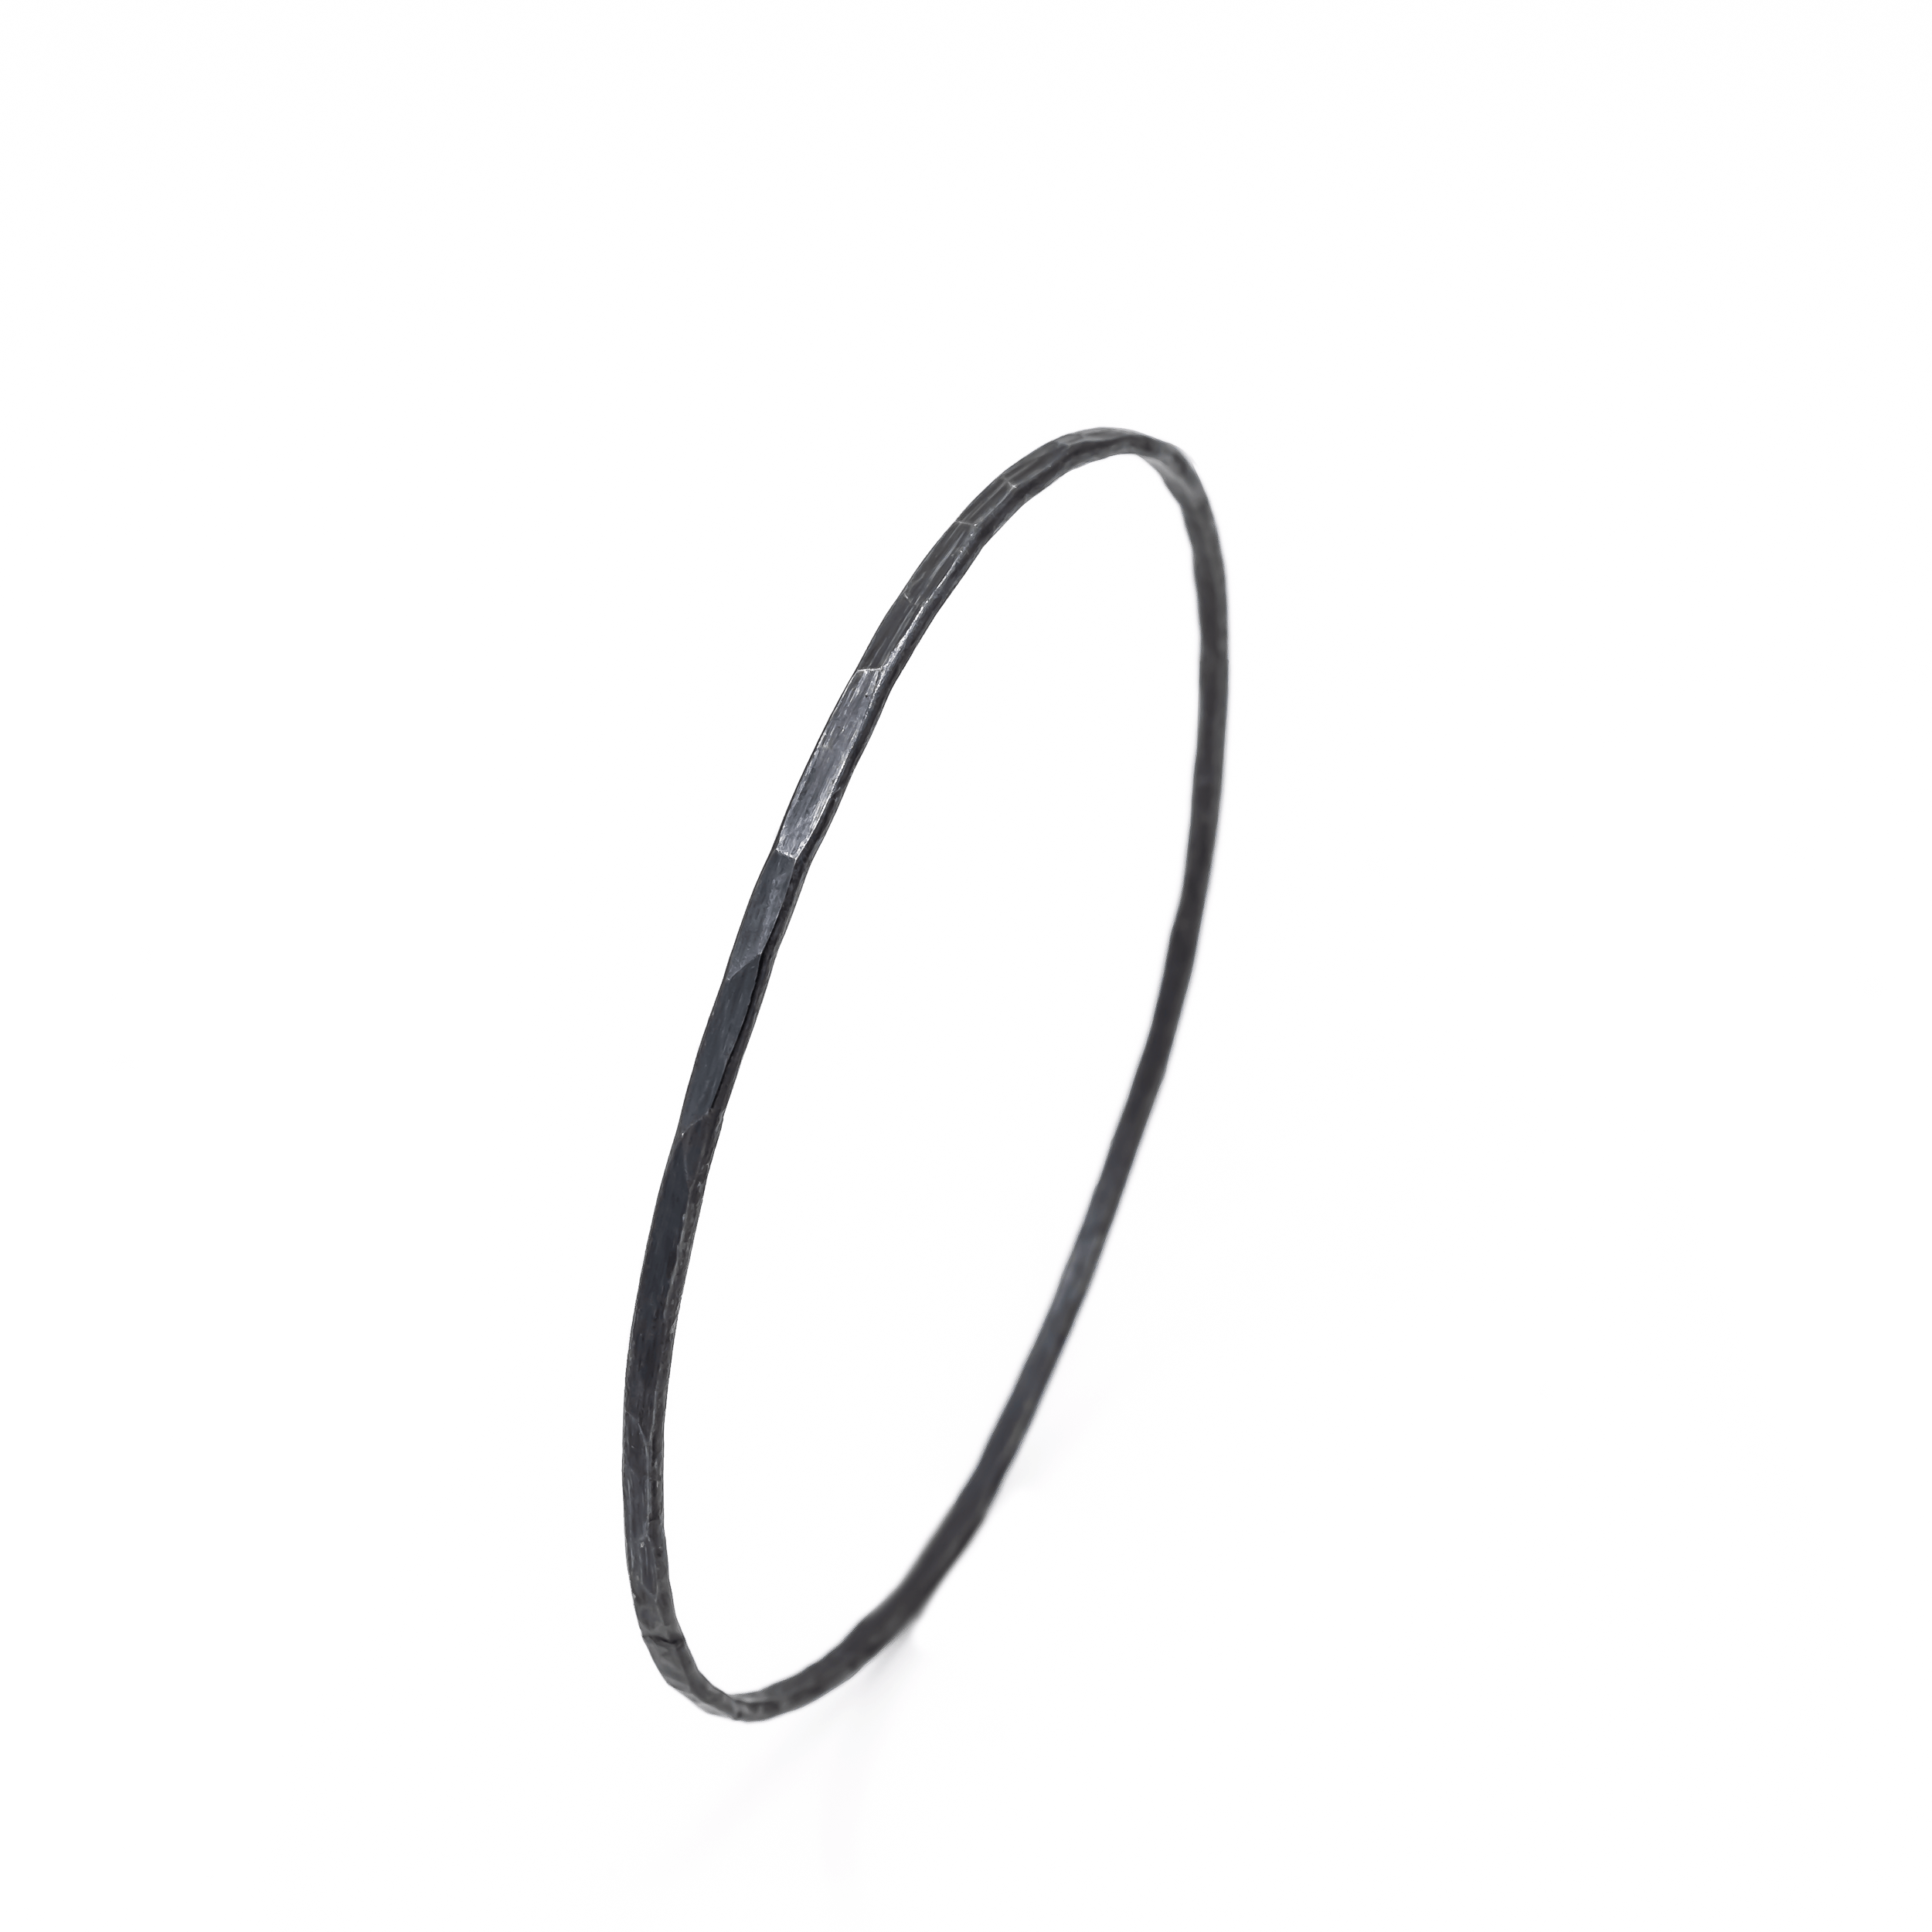 the original closed oxidized sterling silver bangle bracelet side view